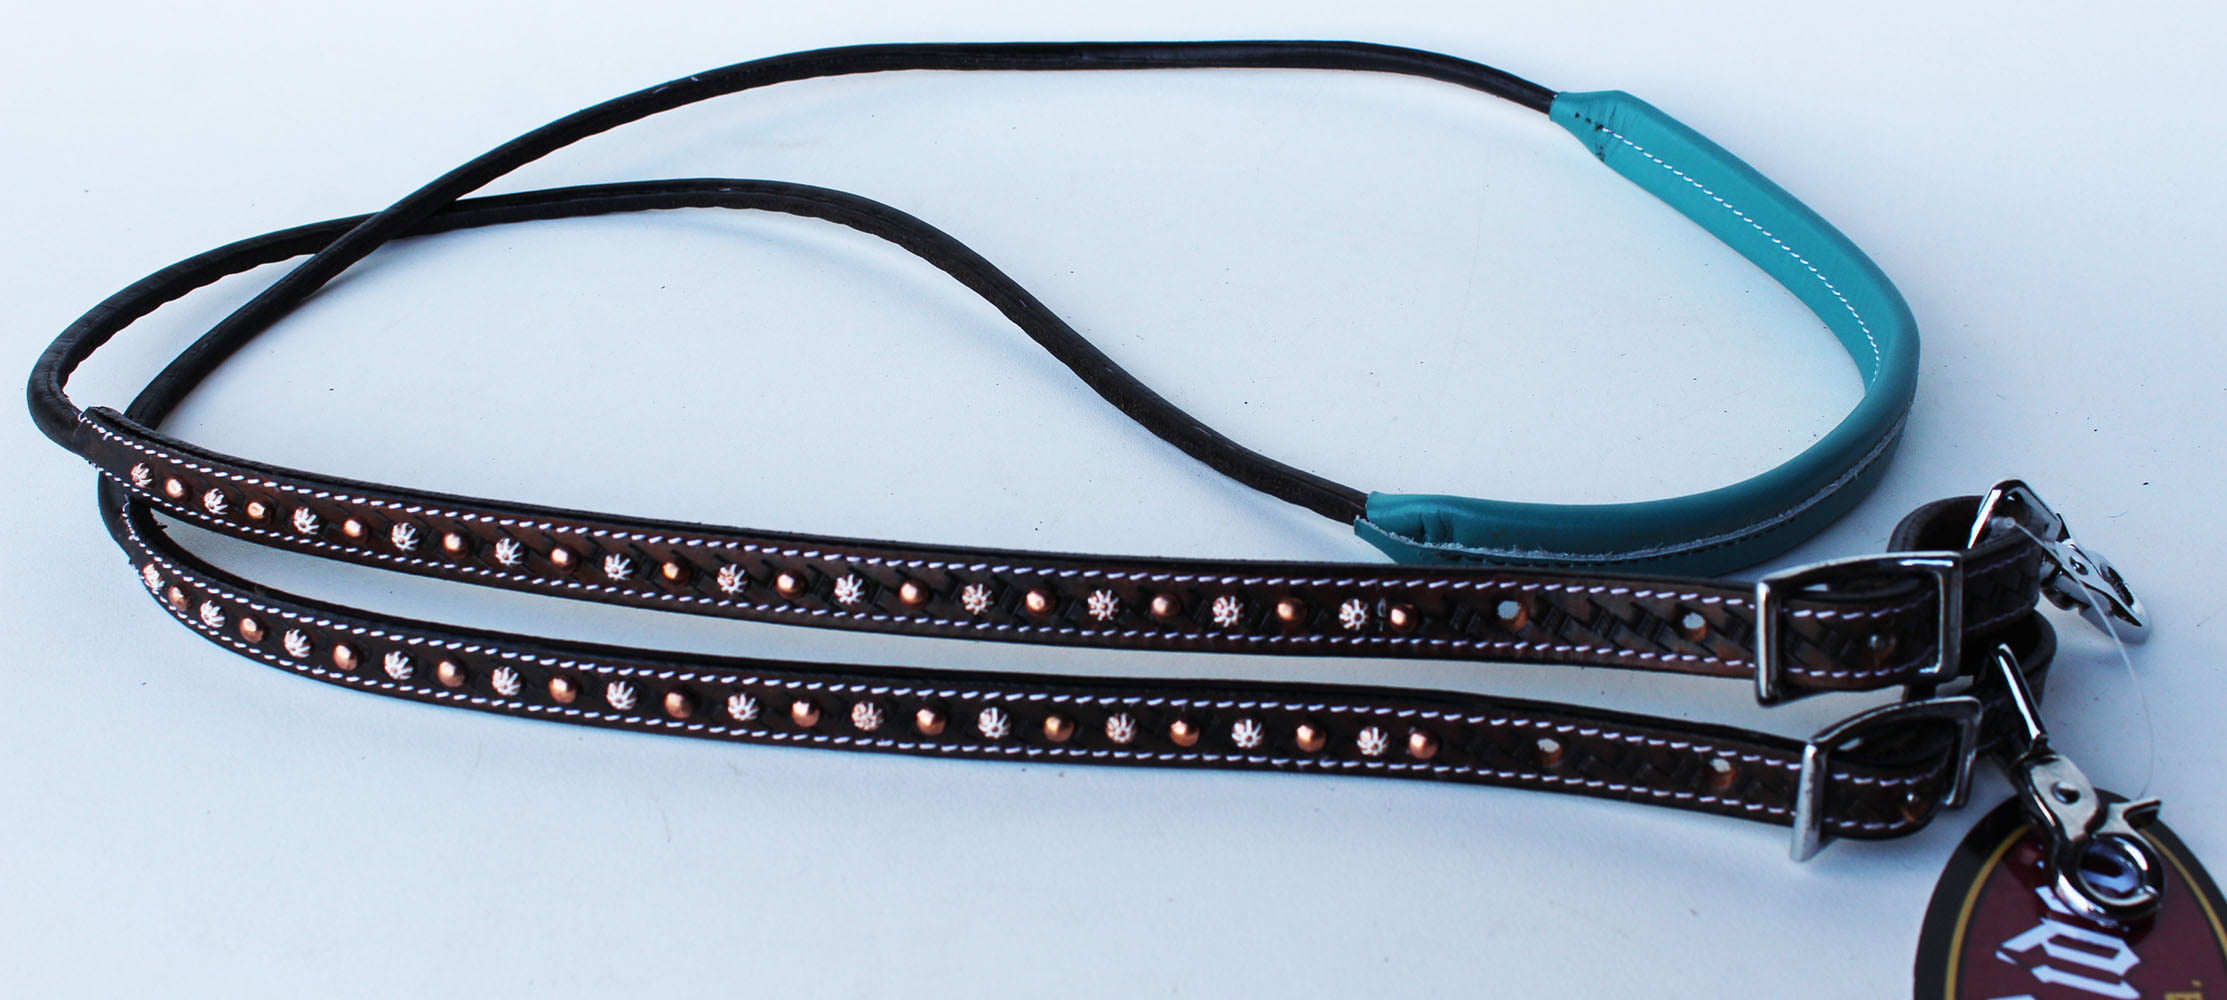 Horse 8ft Contest Western Tack Saddle Barrel Leather Reins Turquoise Brown 6643 